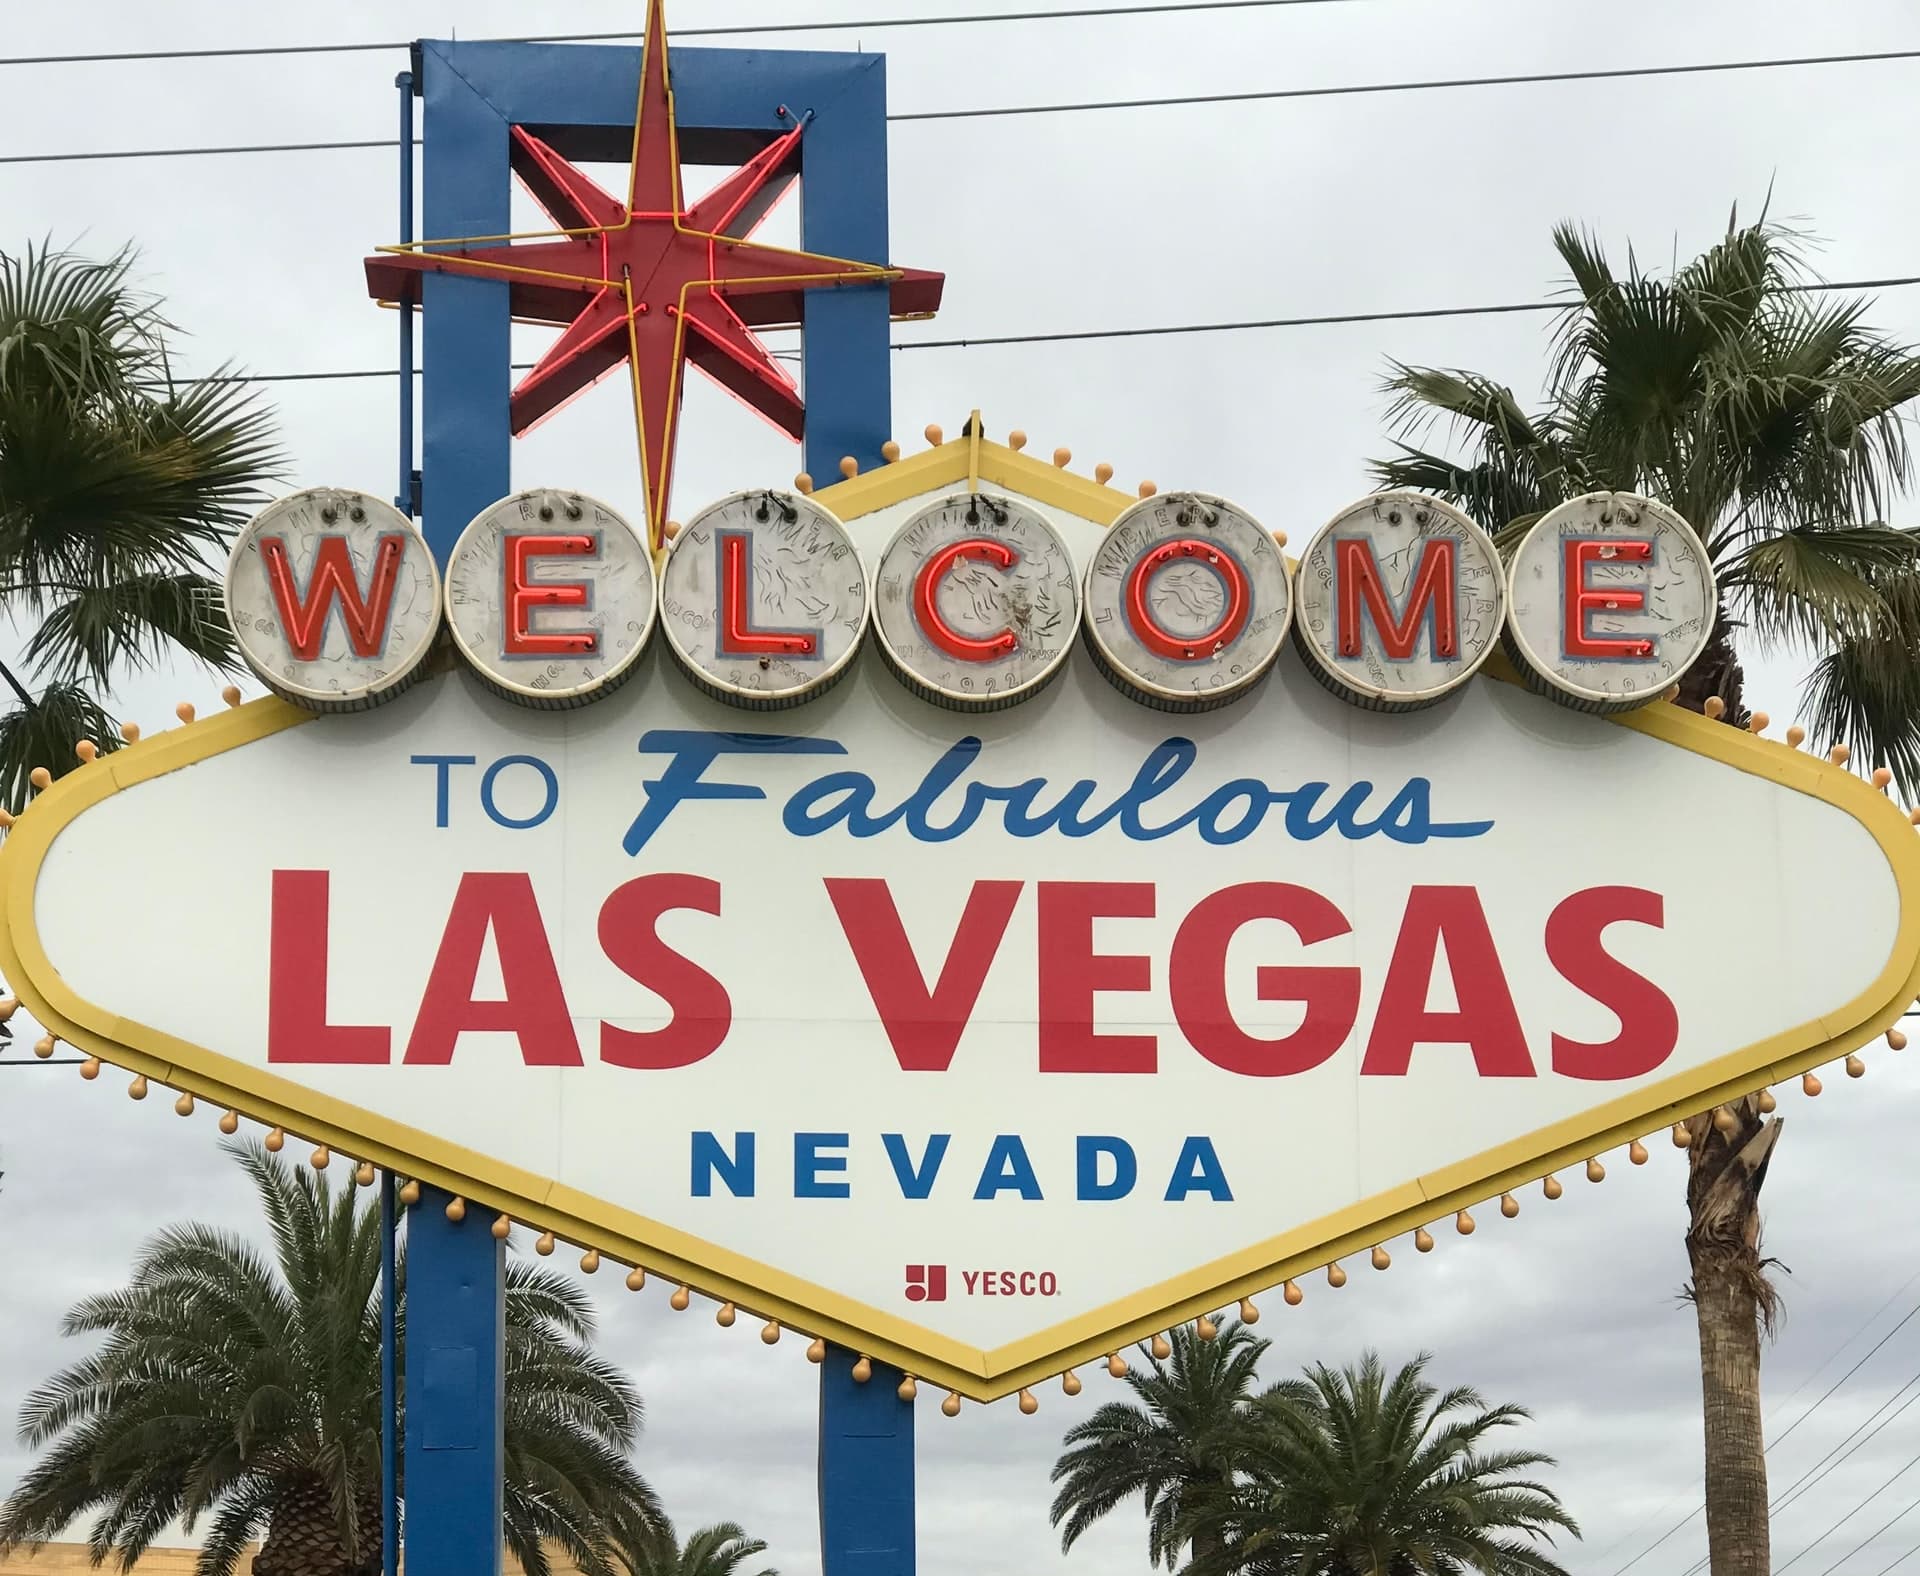 How to Find Affordable Las Vegas Auto Insurance Quotes?